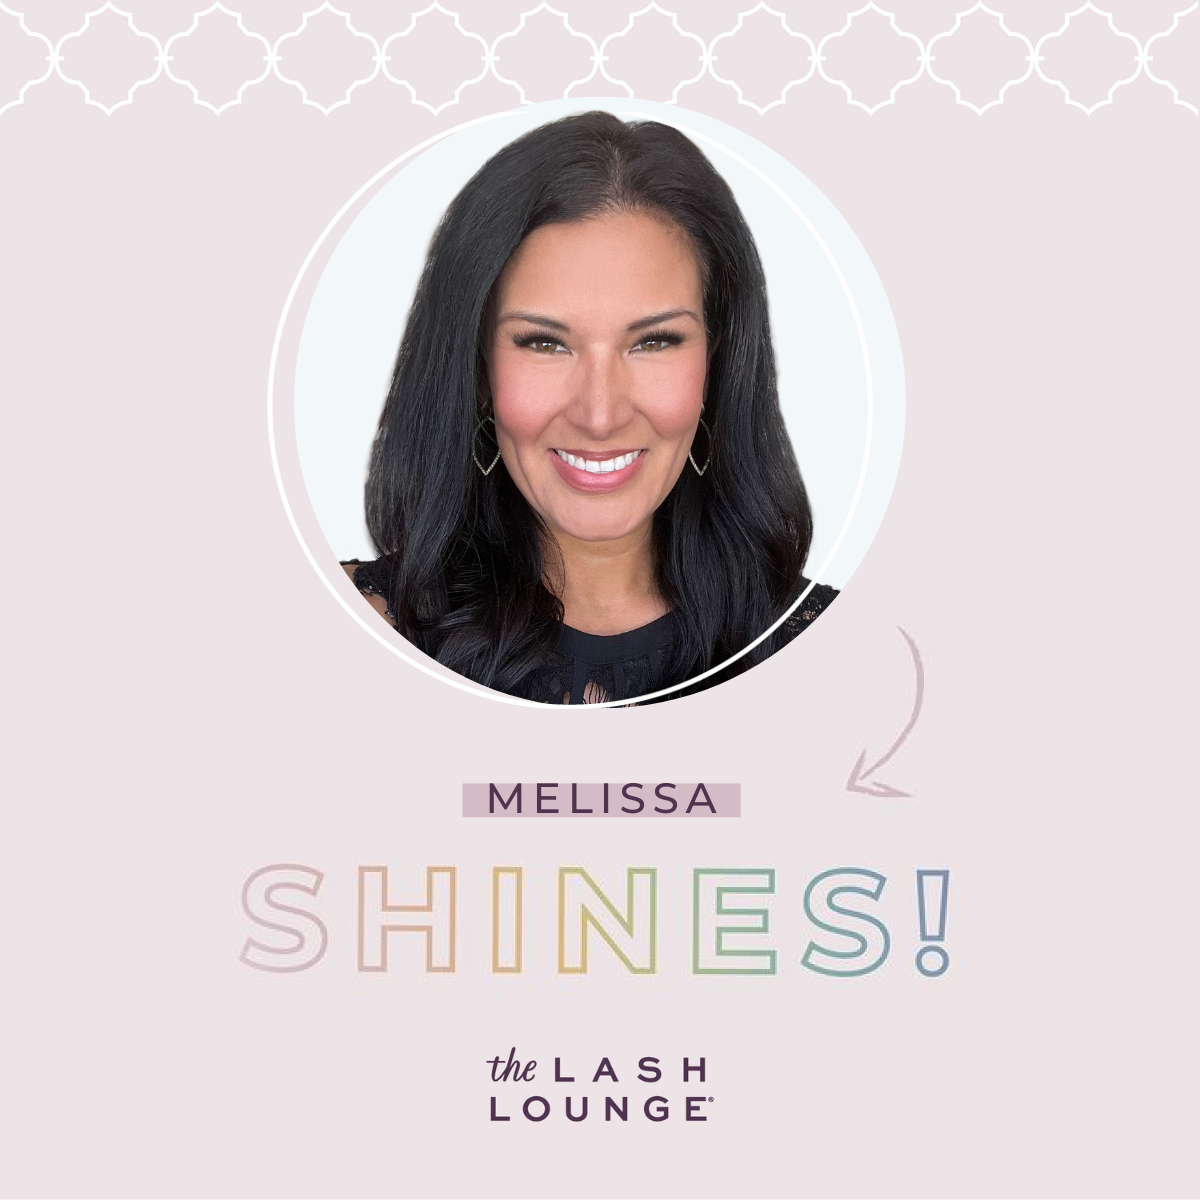 Melissa, Lash Lounge guest, featured in a graphic template where the text reads “Melissa SHINES!"